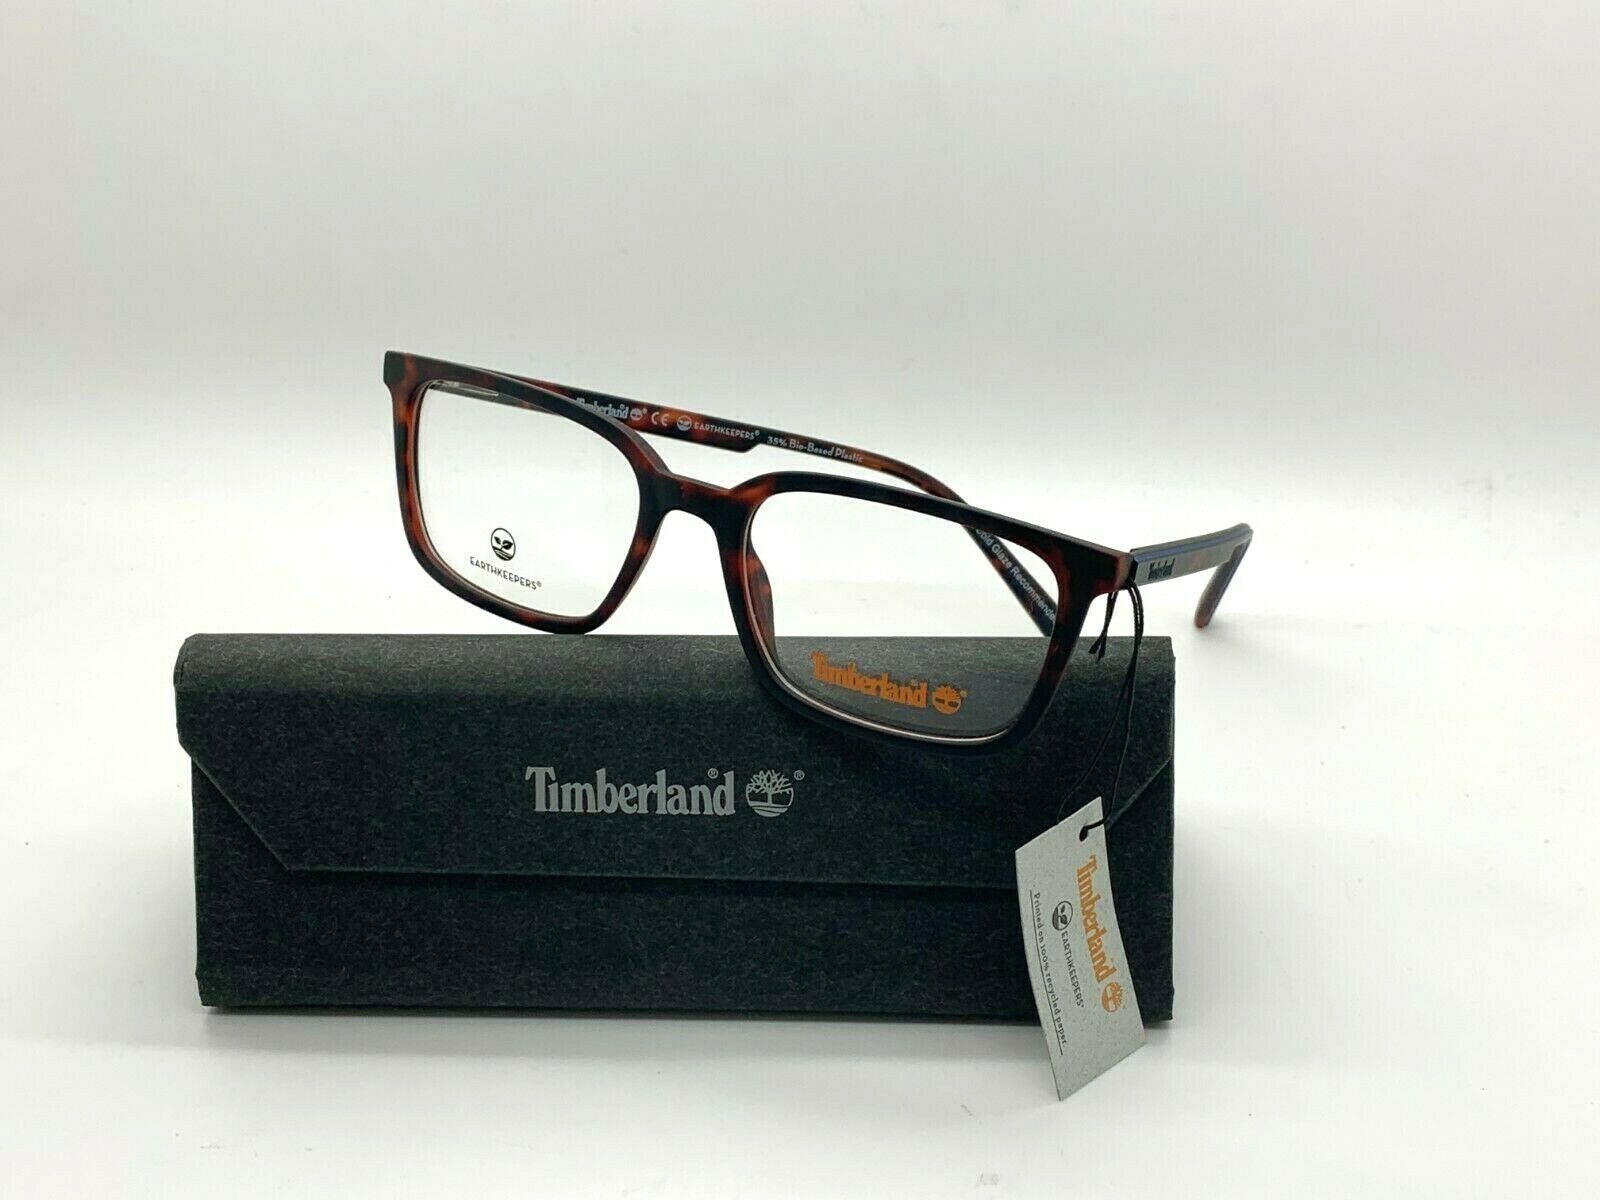 Timberland glasses tb1621 052 matte tortoise 53 18-145mm/holster earthkeepers